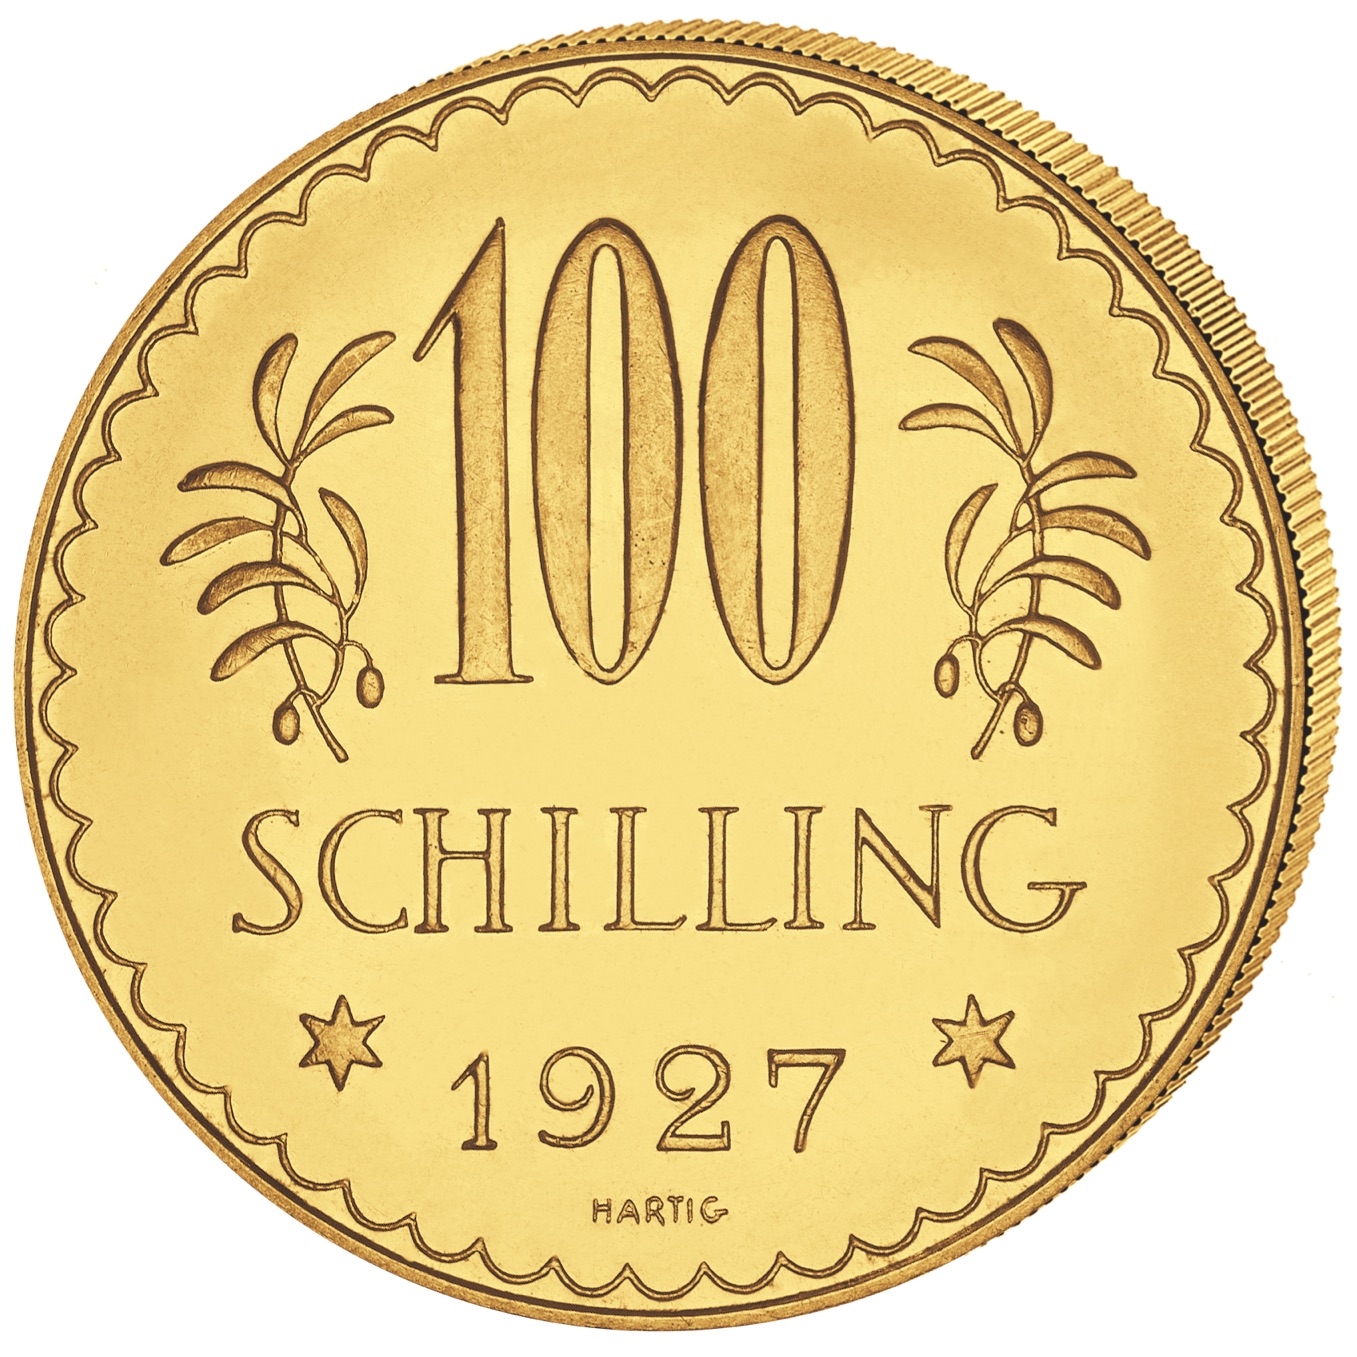 AT 100 Schilling 1931